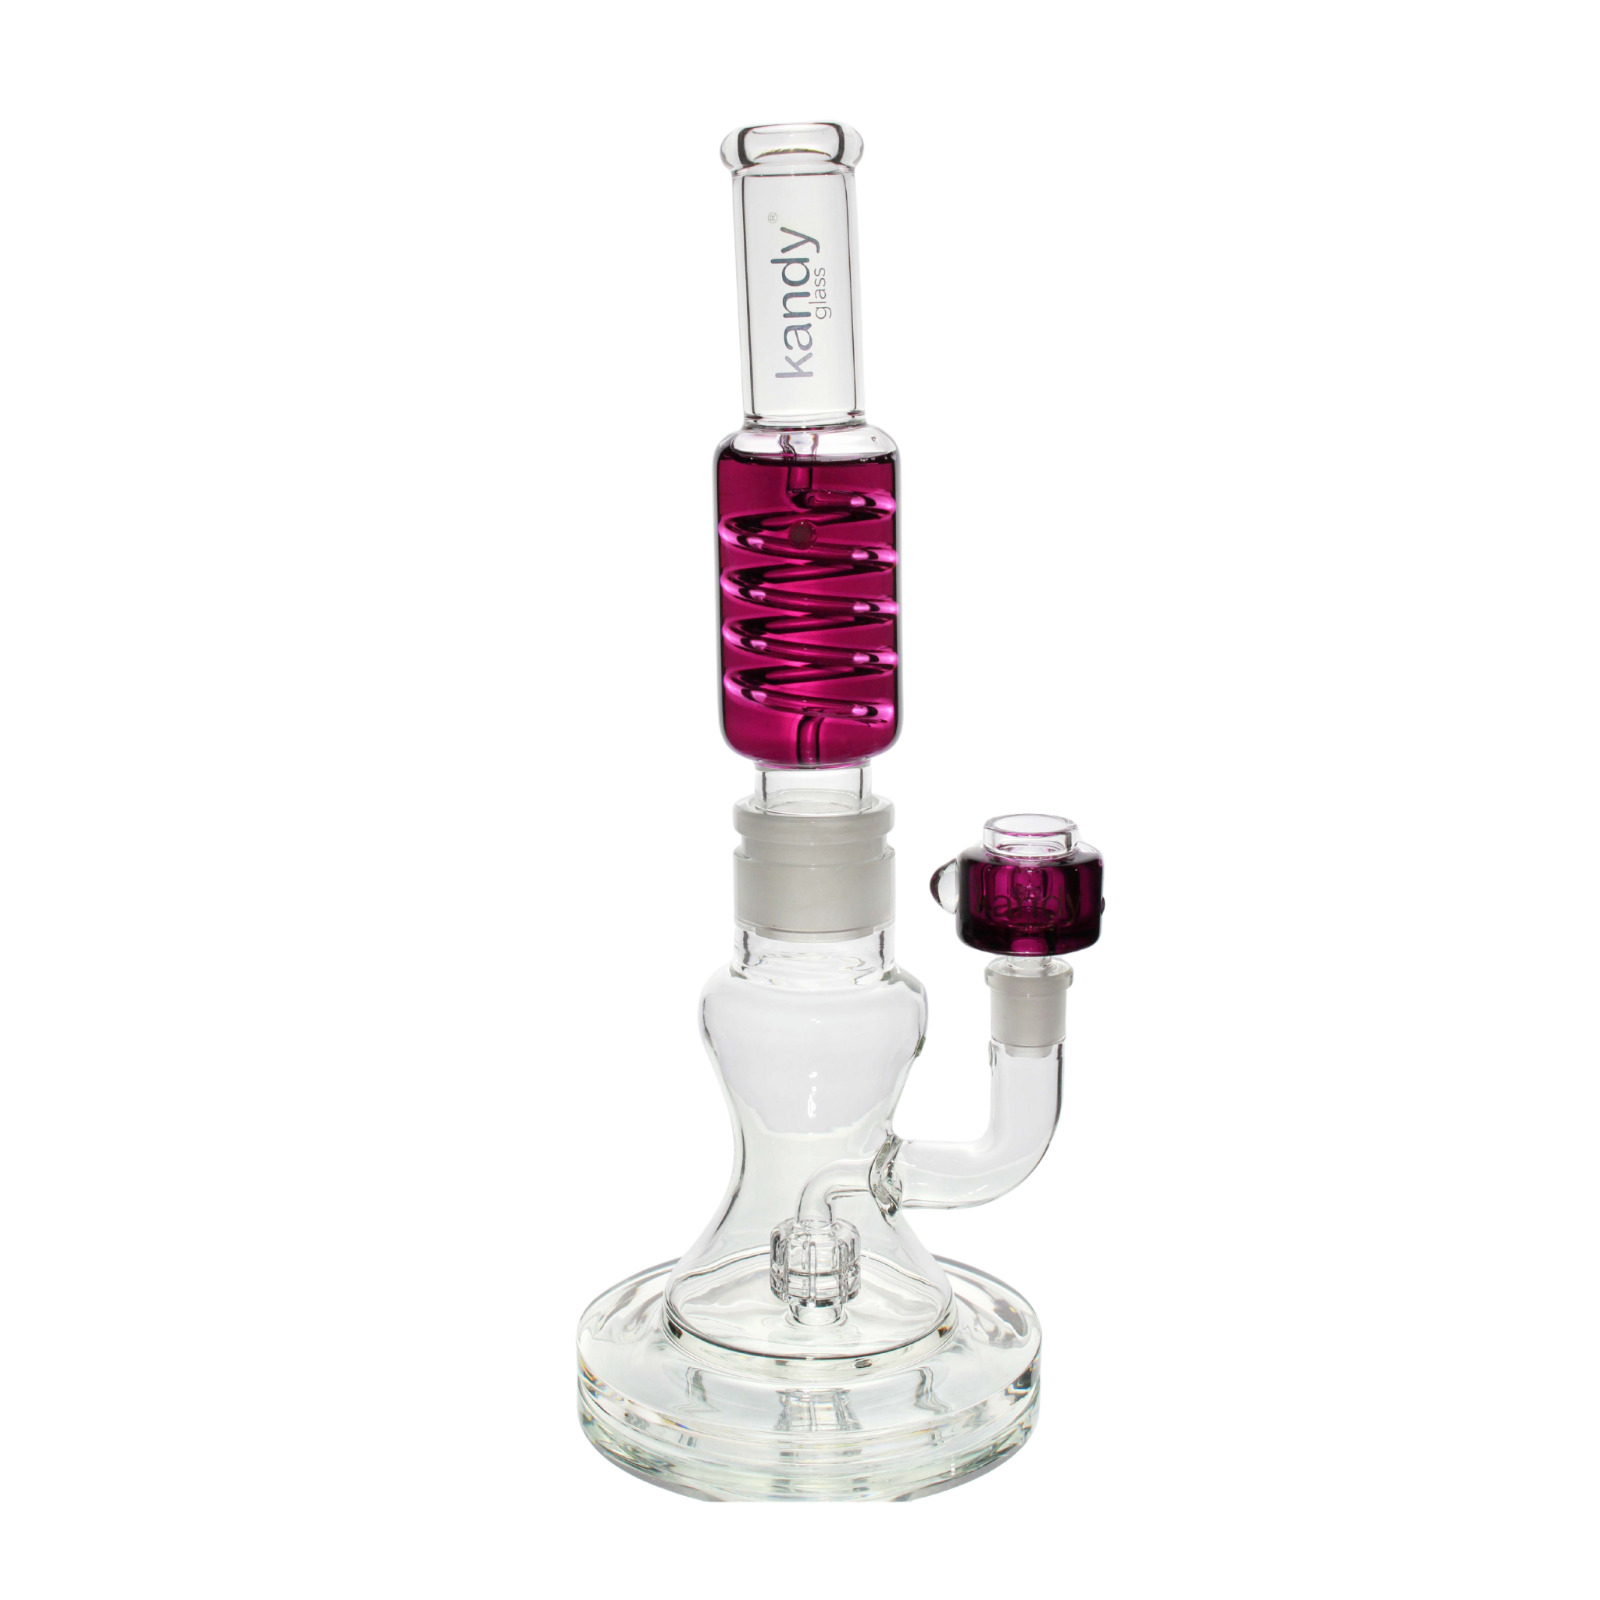 14 inch glass bong smoking hookah water pipe with glycerin top and bowl